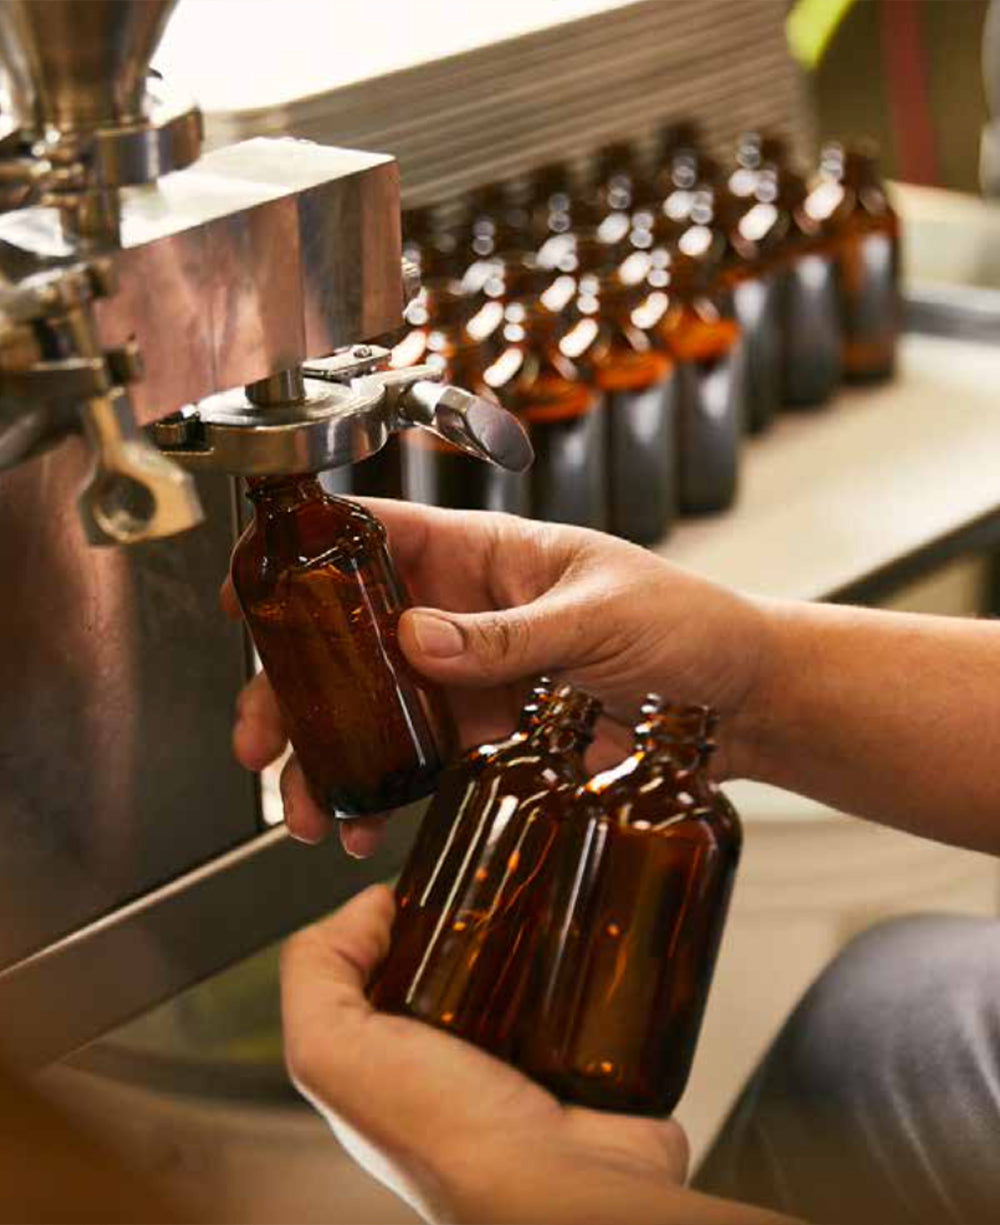 PF Candle Co behind the scenes showing the fragrance bottling process being done by hand